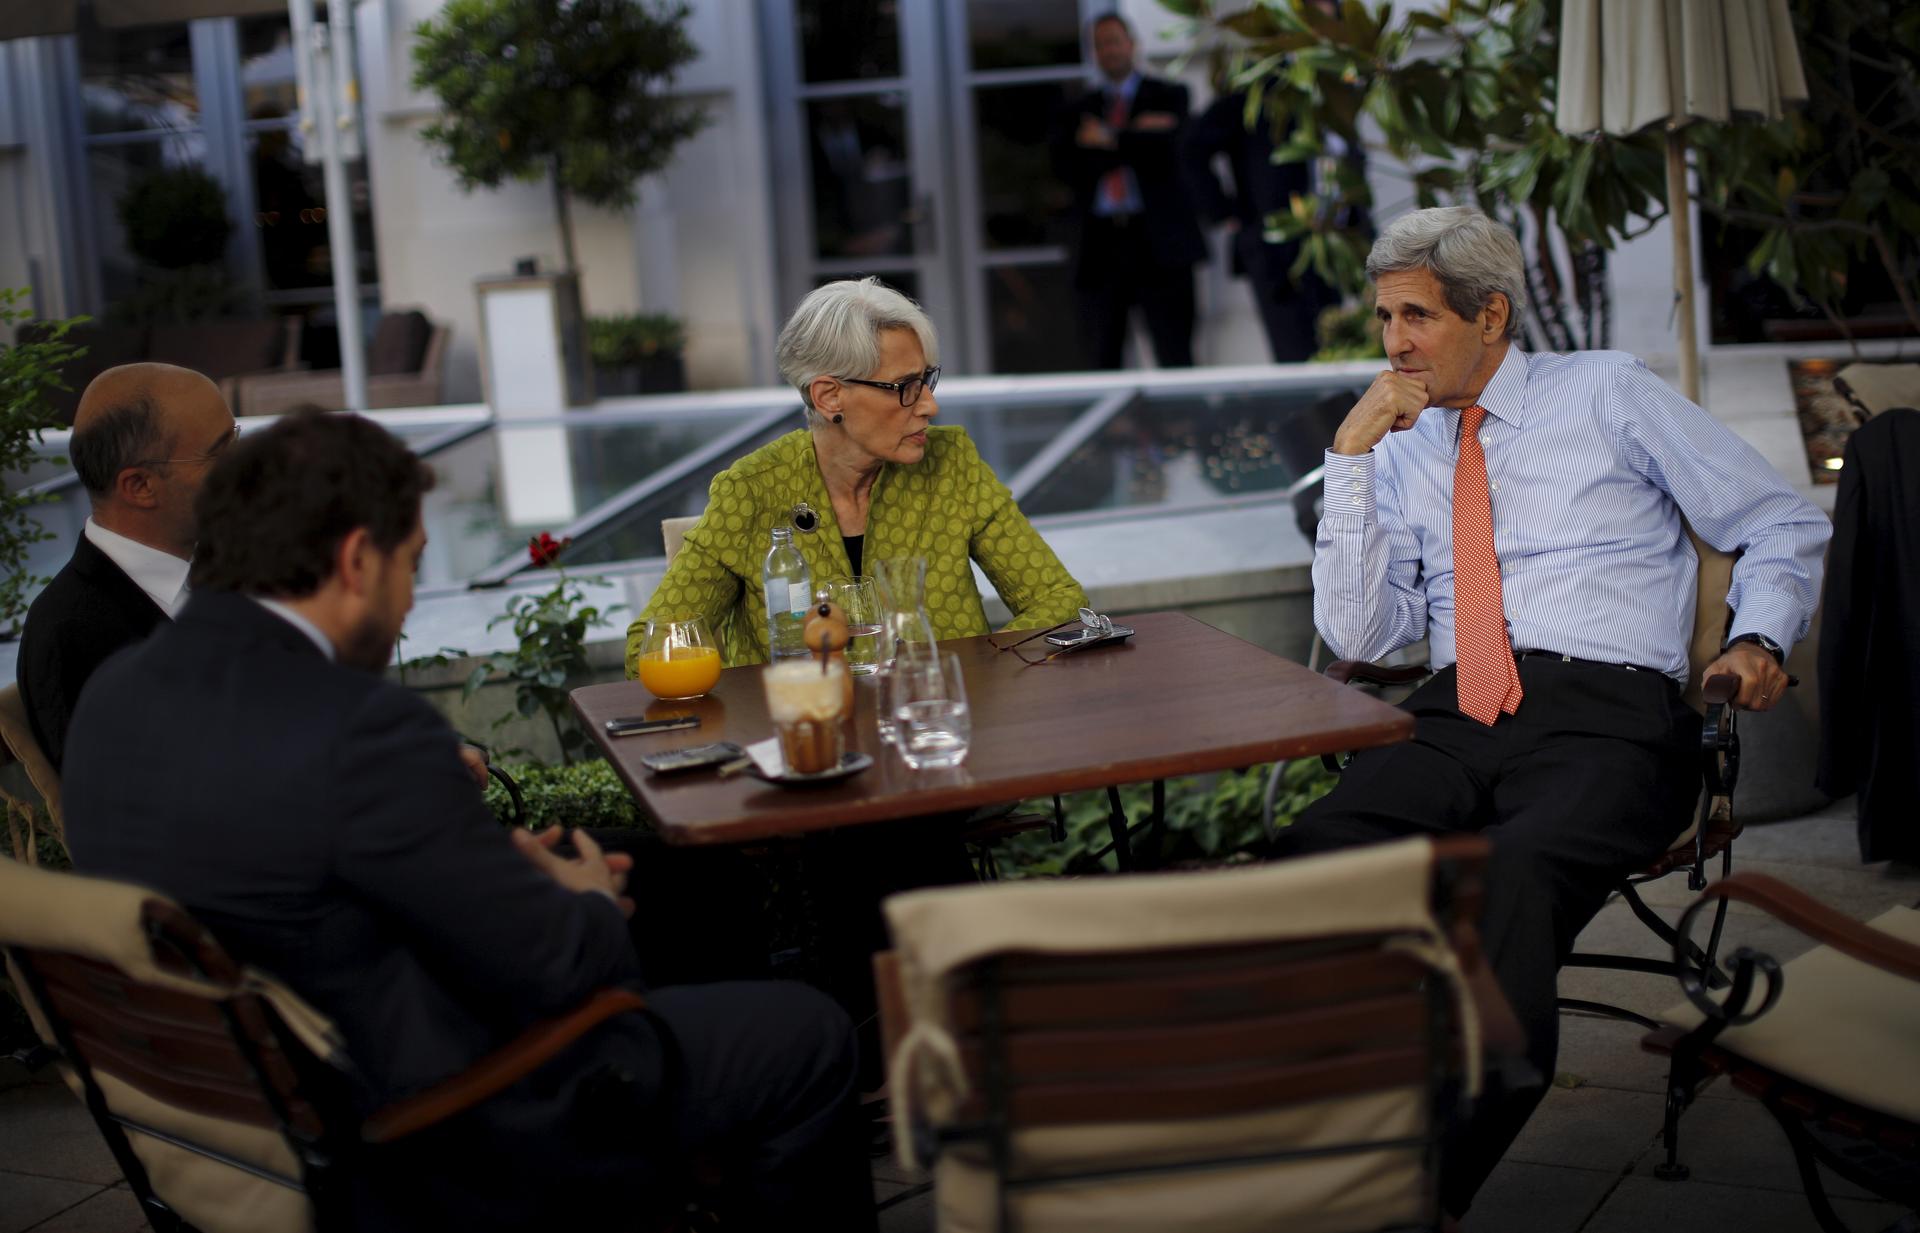 U.S. Secretary of State John Kerry (R), U.S. Under Secretary for Political Affairs Wendy Sherman (C), National Security Council point person on the Middle East Robert Malley (L) and Chief of Staff Jon Finer (2nd L) meet on the terrace of a hotel where the